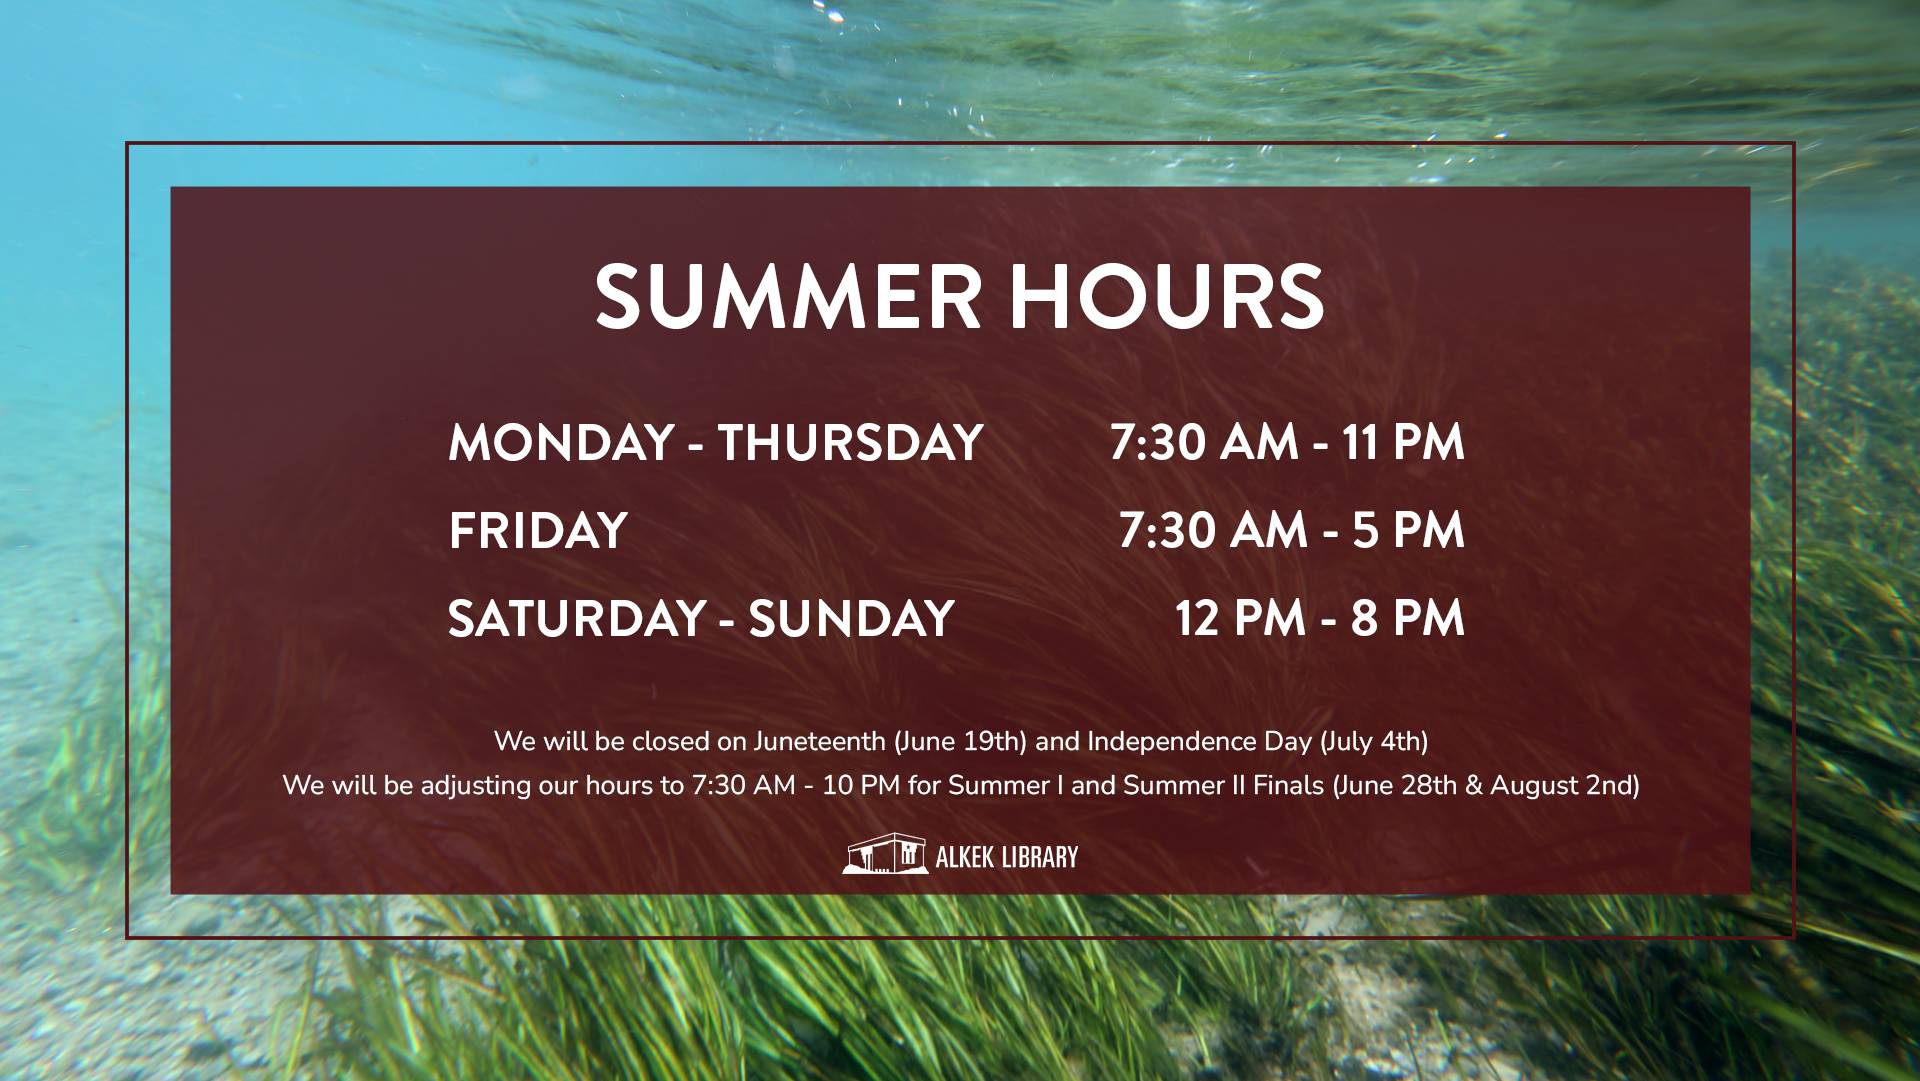 Summer Hours, Monday-Thursday 7:30 AM - 11 PM, Friday 7:30 AM - 5 PM, Saturday -Sunday 12 PM - 8 PM. We will be closed on Juneteenth (June 19th) and Independence Day (July 4th). We will be adjusting our hours to 7:30 AM - 10 PM for Summer 1 and Summer 2 finals (June 28th & August 2nd).